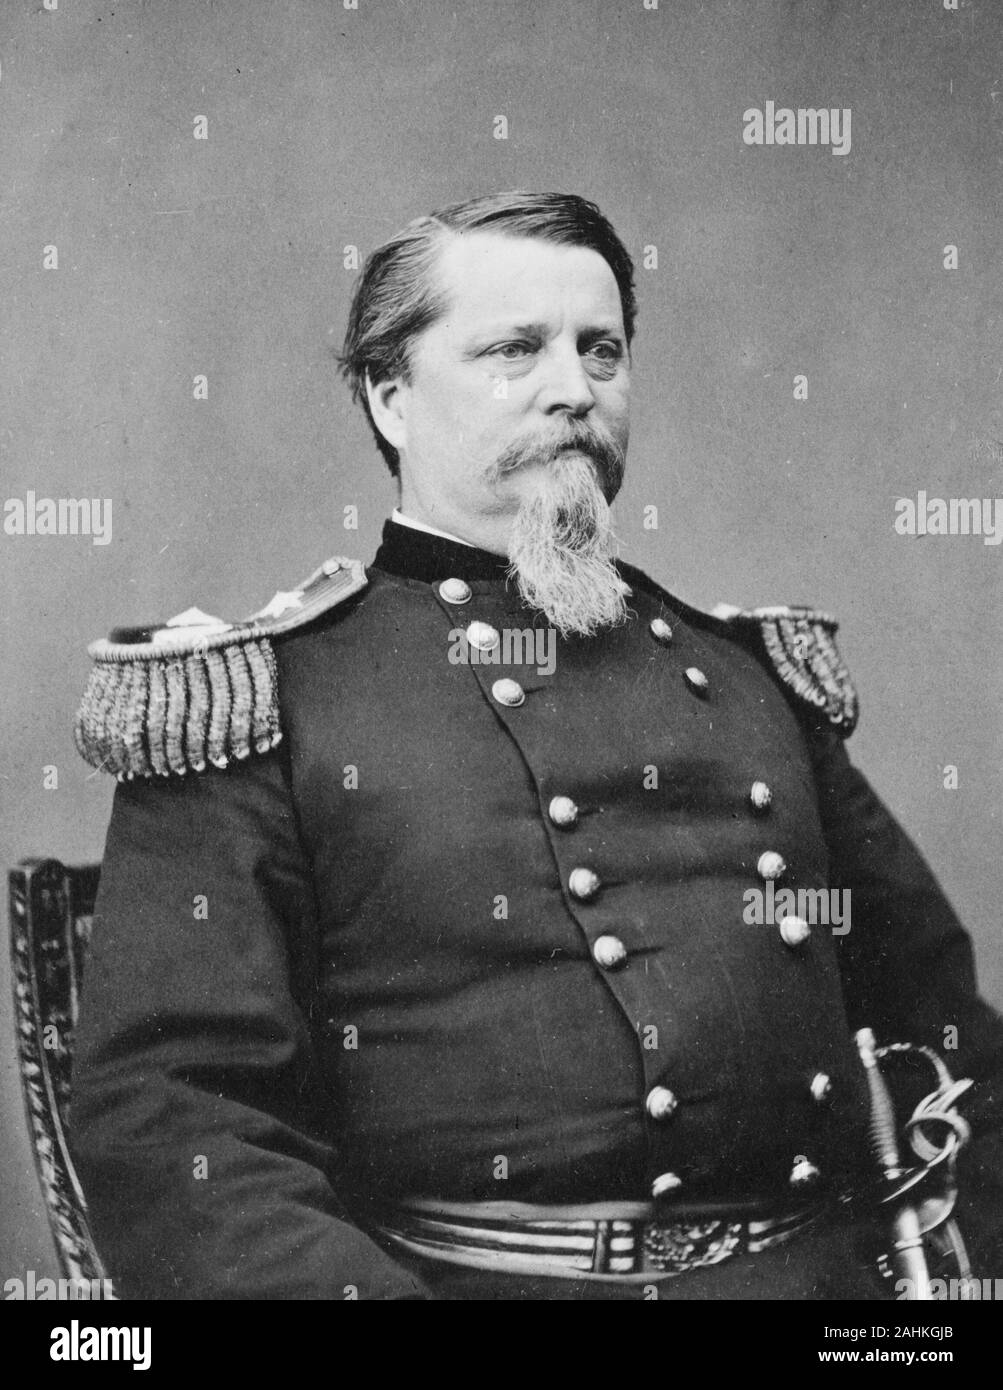 Winfield Scott Hancock (1824 – 1886) United States Army officer and the Democratic nominee for President of the United States in 1880. Stock Photo